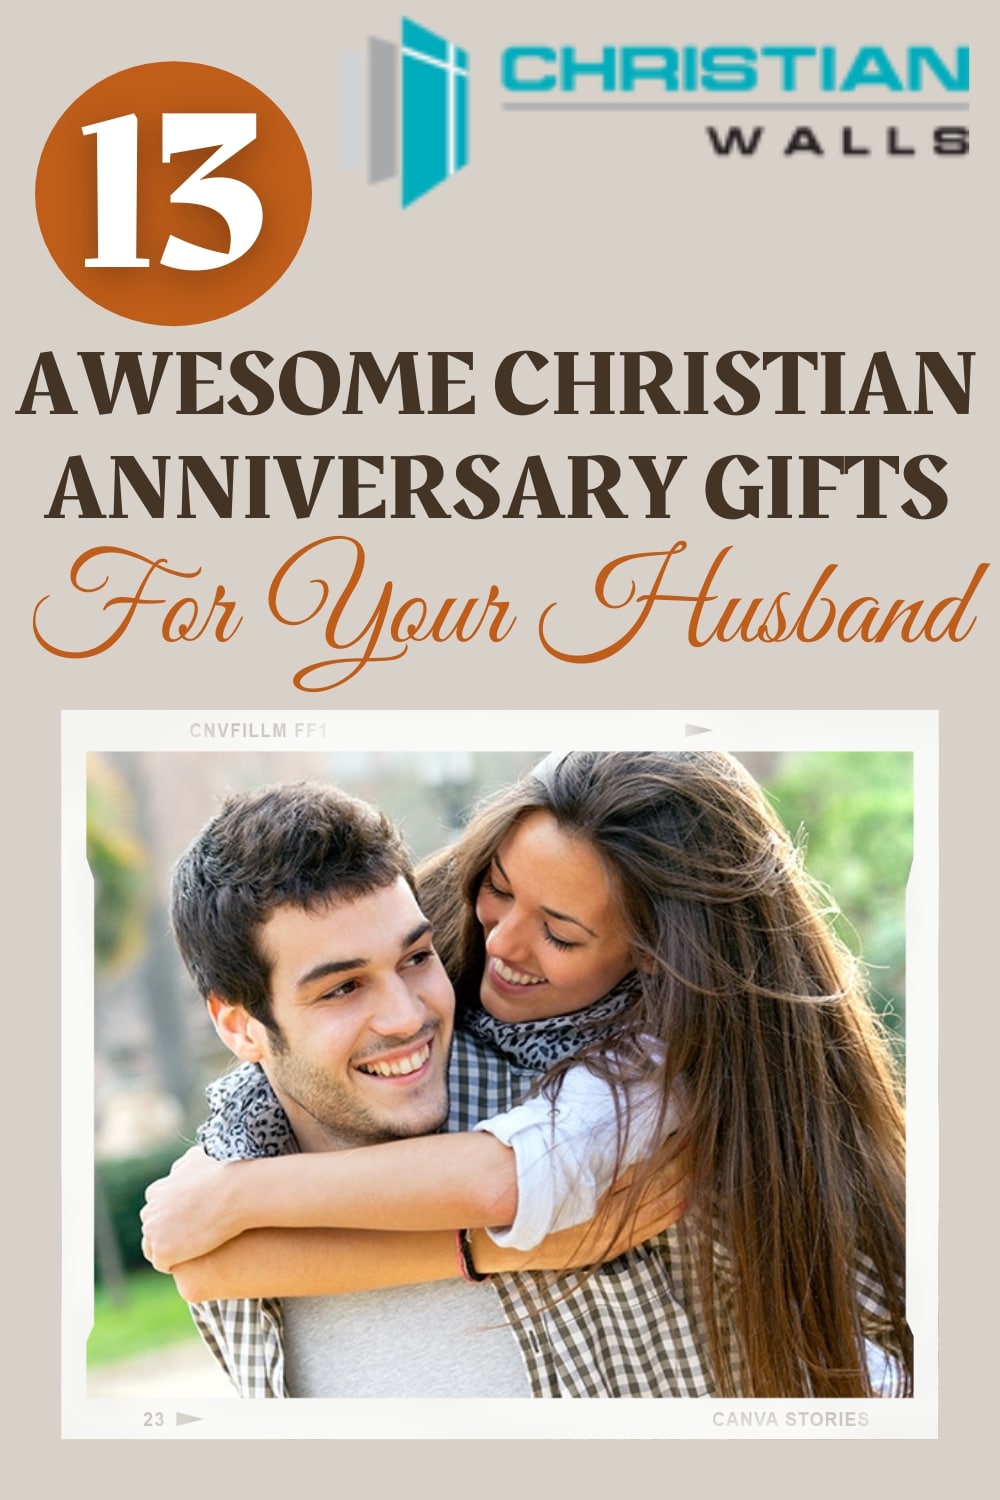 13 Awesome Ideas for Christian Anniversary Gift for Husband – Christian  Walls